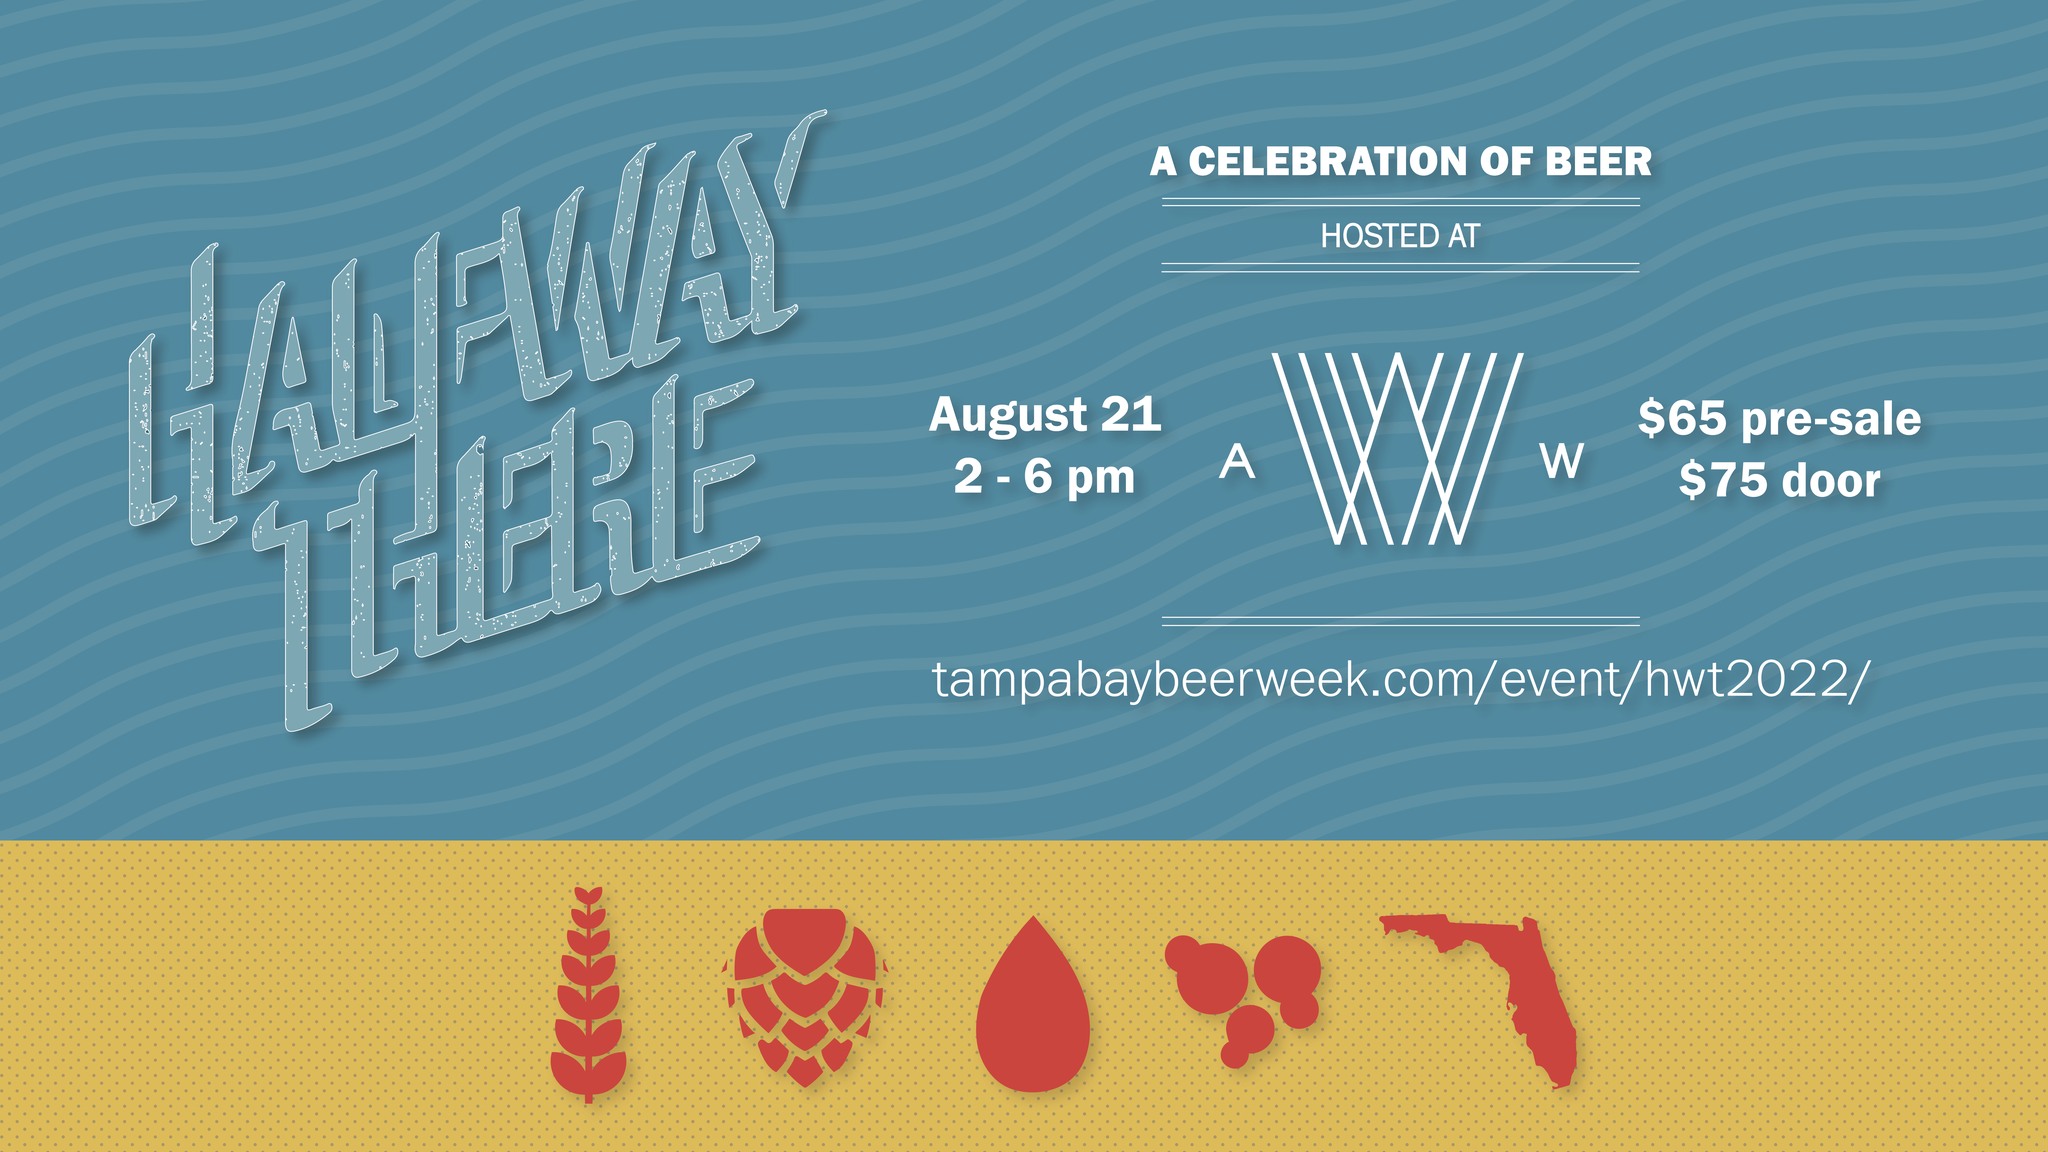 Halfway There: A Celebration of Beer